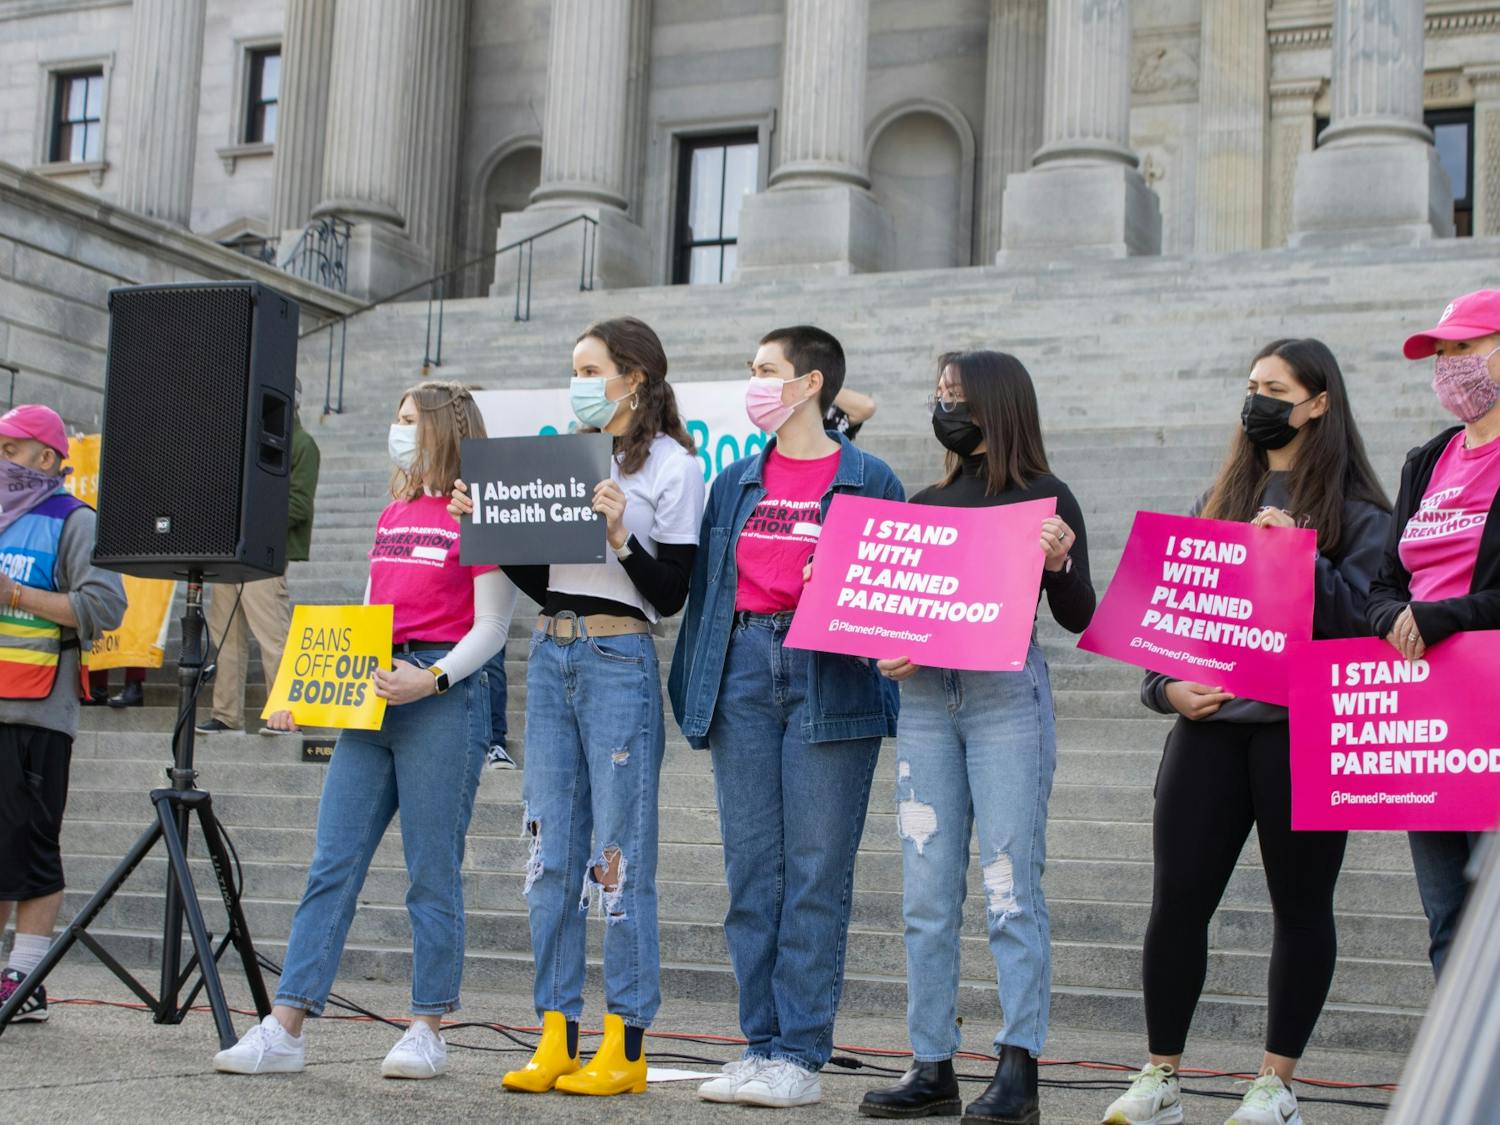 Protestors stand on the steps of the South Carolina capitol building on Feb. 17, 2022. The protestors were part of a demonstration against anti-abortion bills.